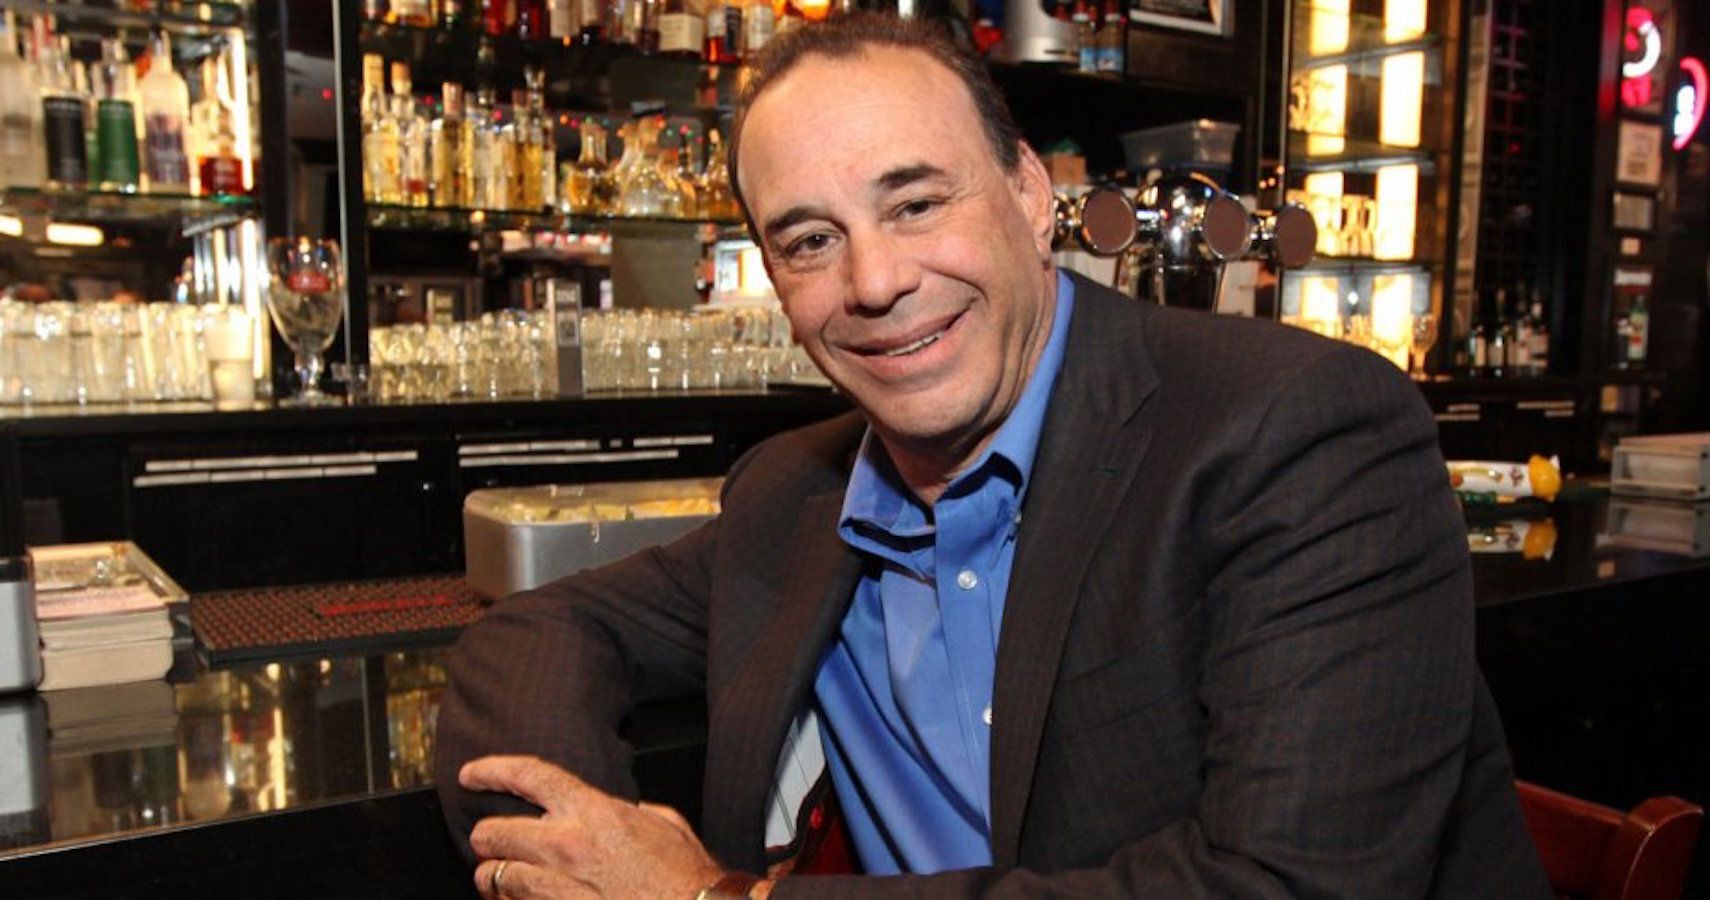 5 Of The Funniest Bar Rescue Episodes & 5 Of The Worst Ranked